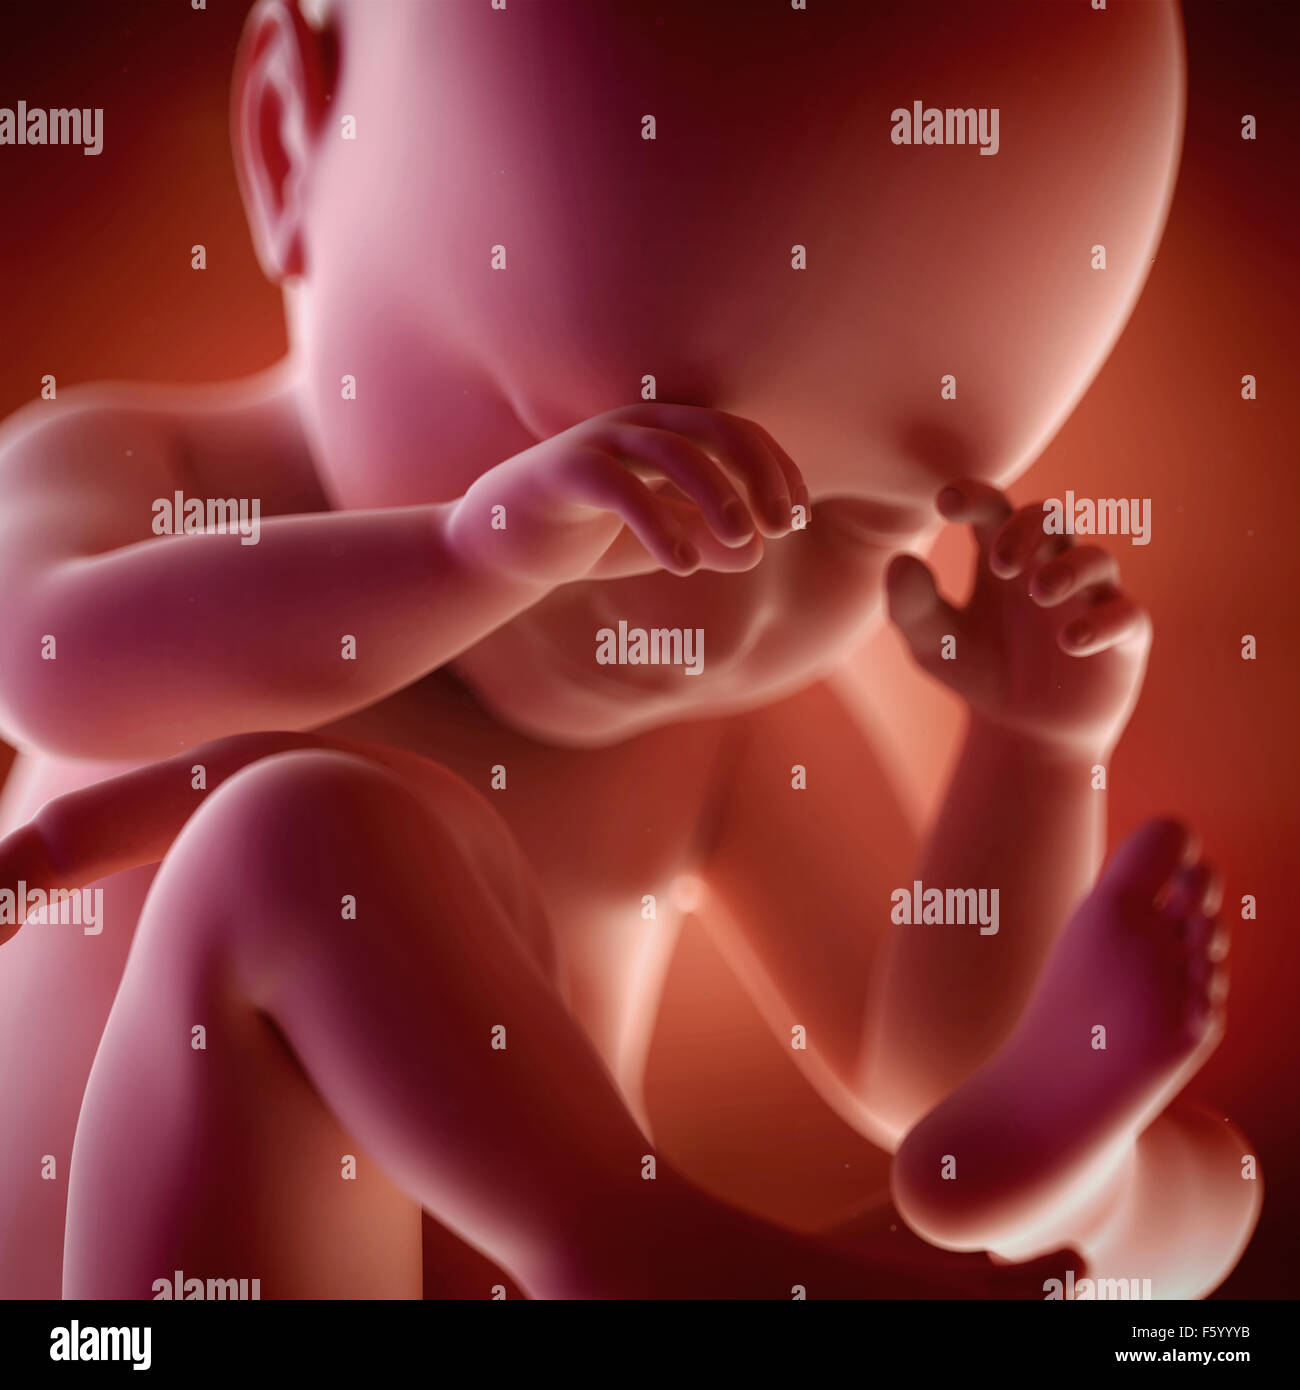 medical accurate 3d illustration of a fetus week 38 Stock Photo